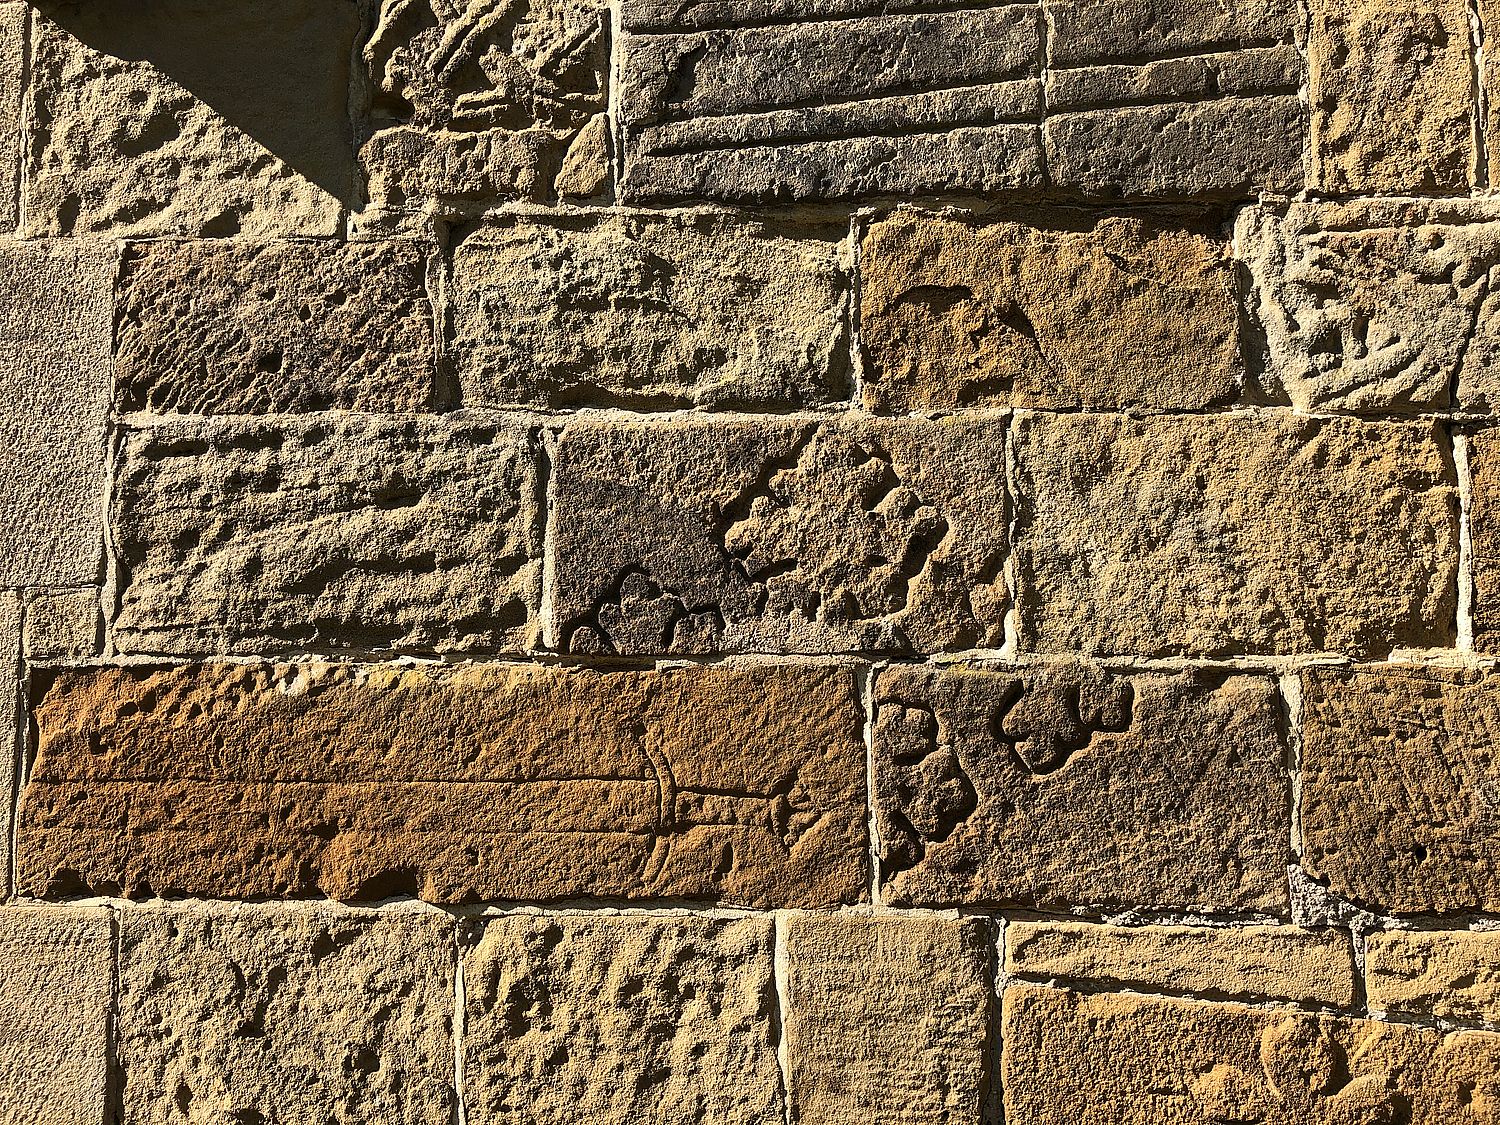 Stones and fragments from earlier Churches are incorporated in the walls